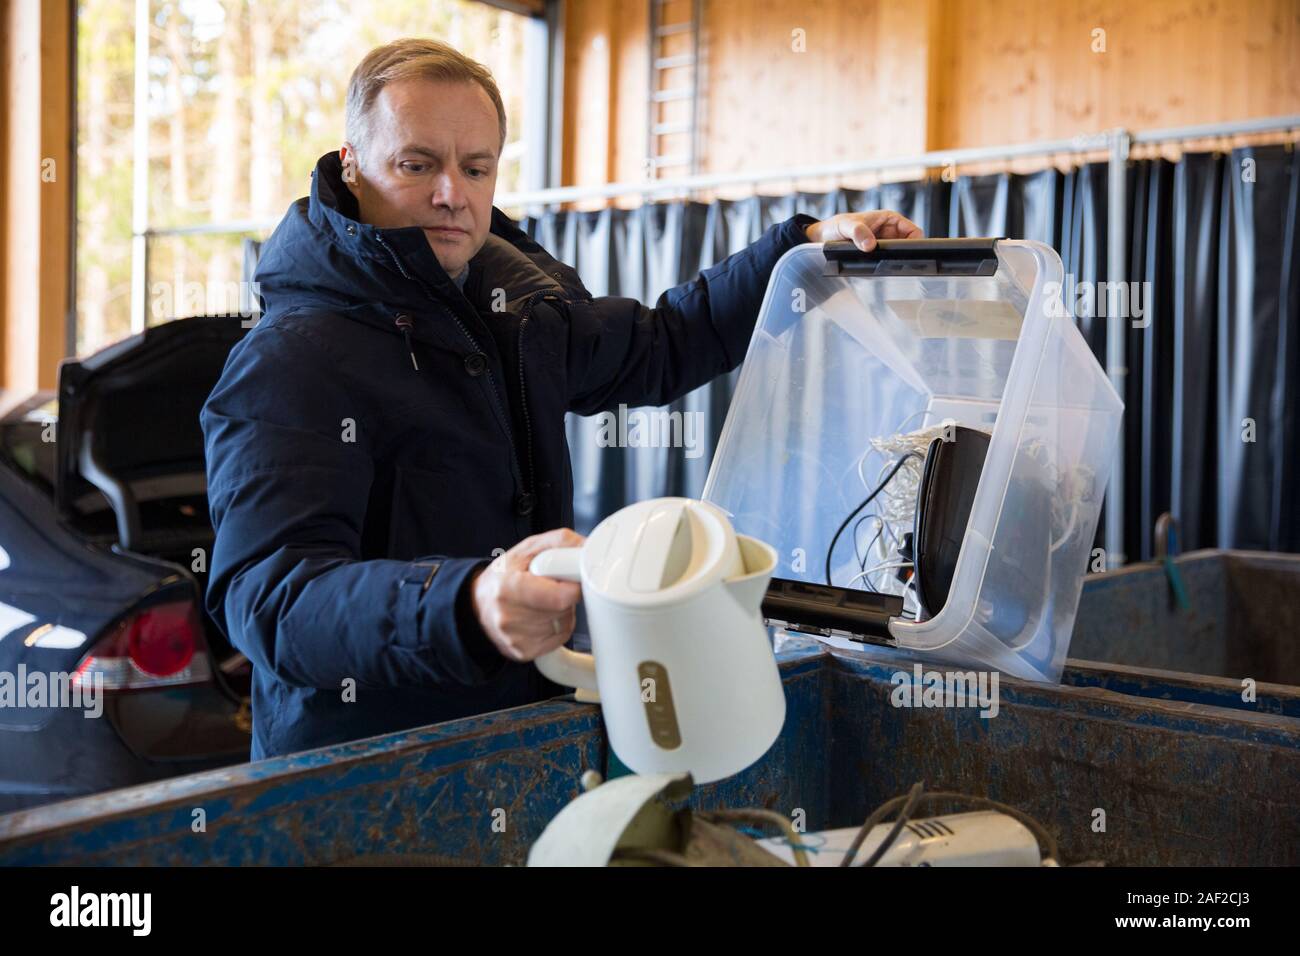 A man putting old appliances into dumpster in sorting centre for safe disposal and recycling Stock Photo